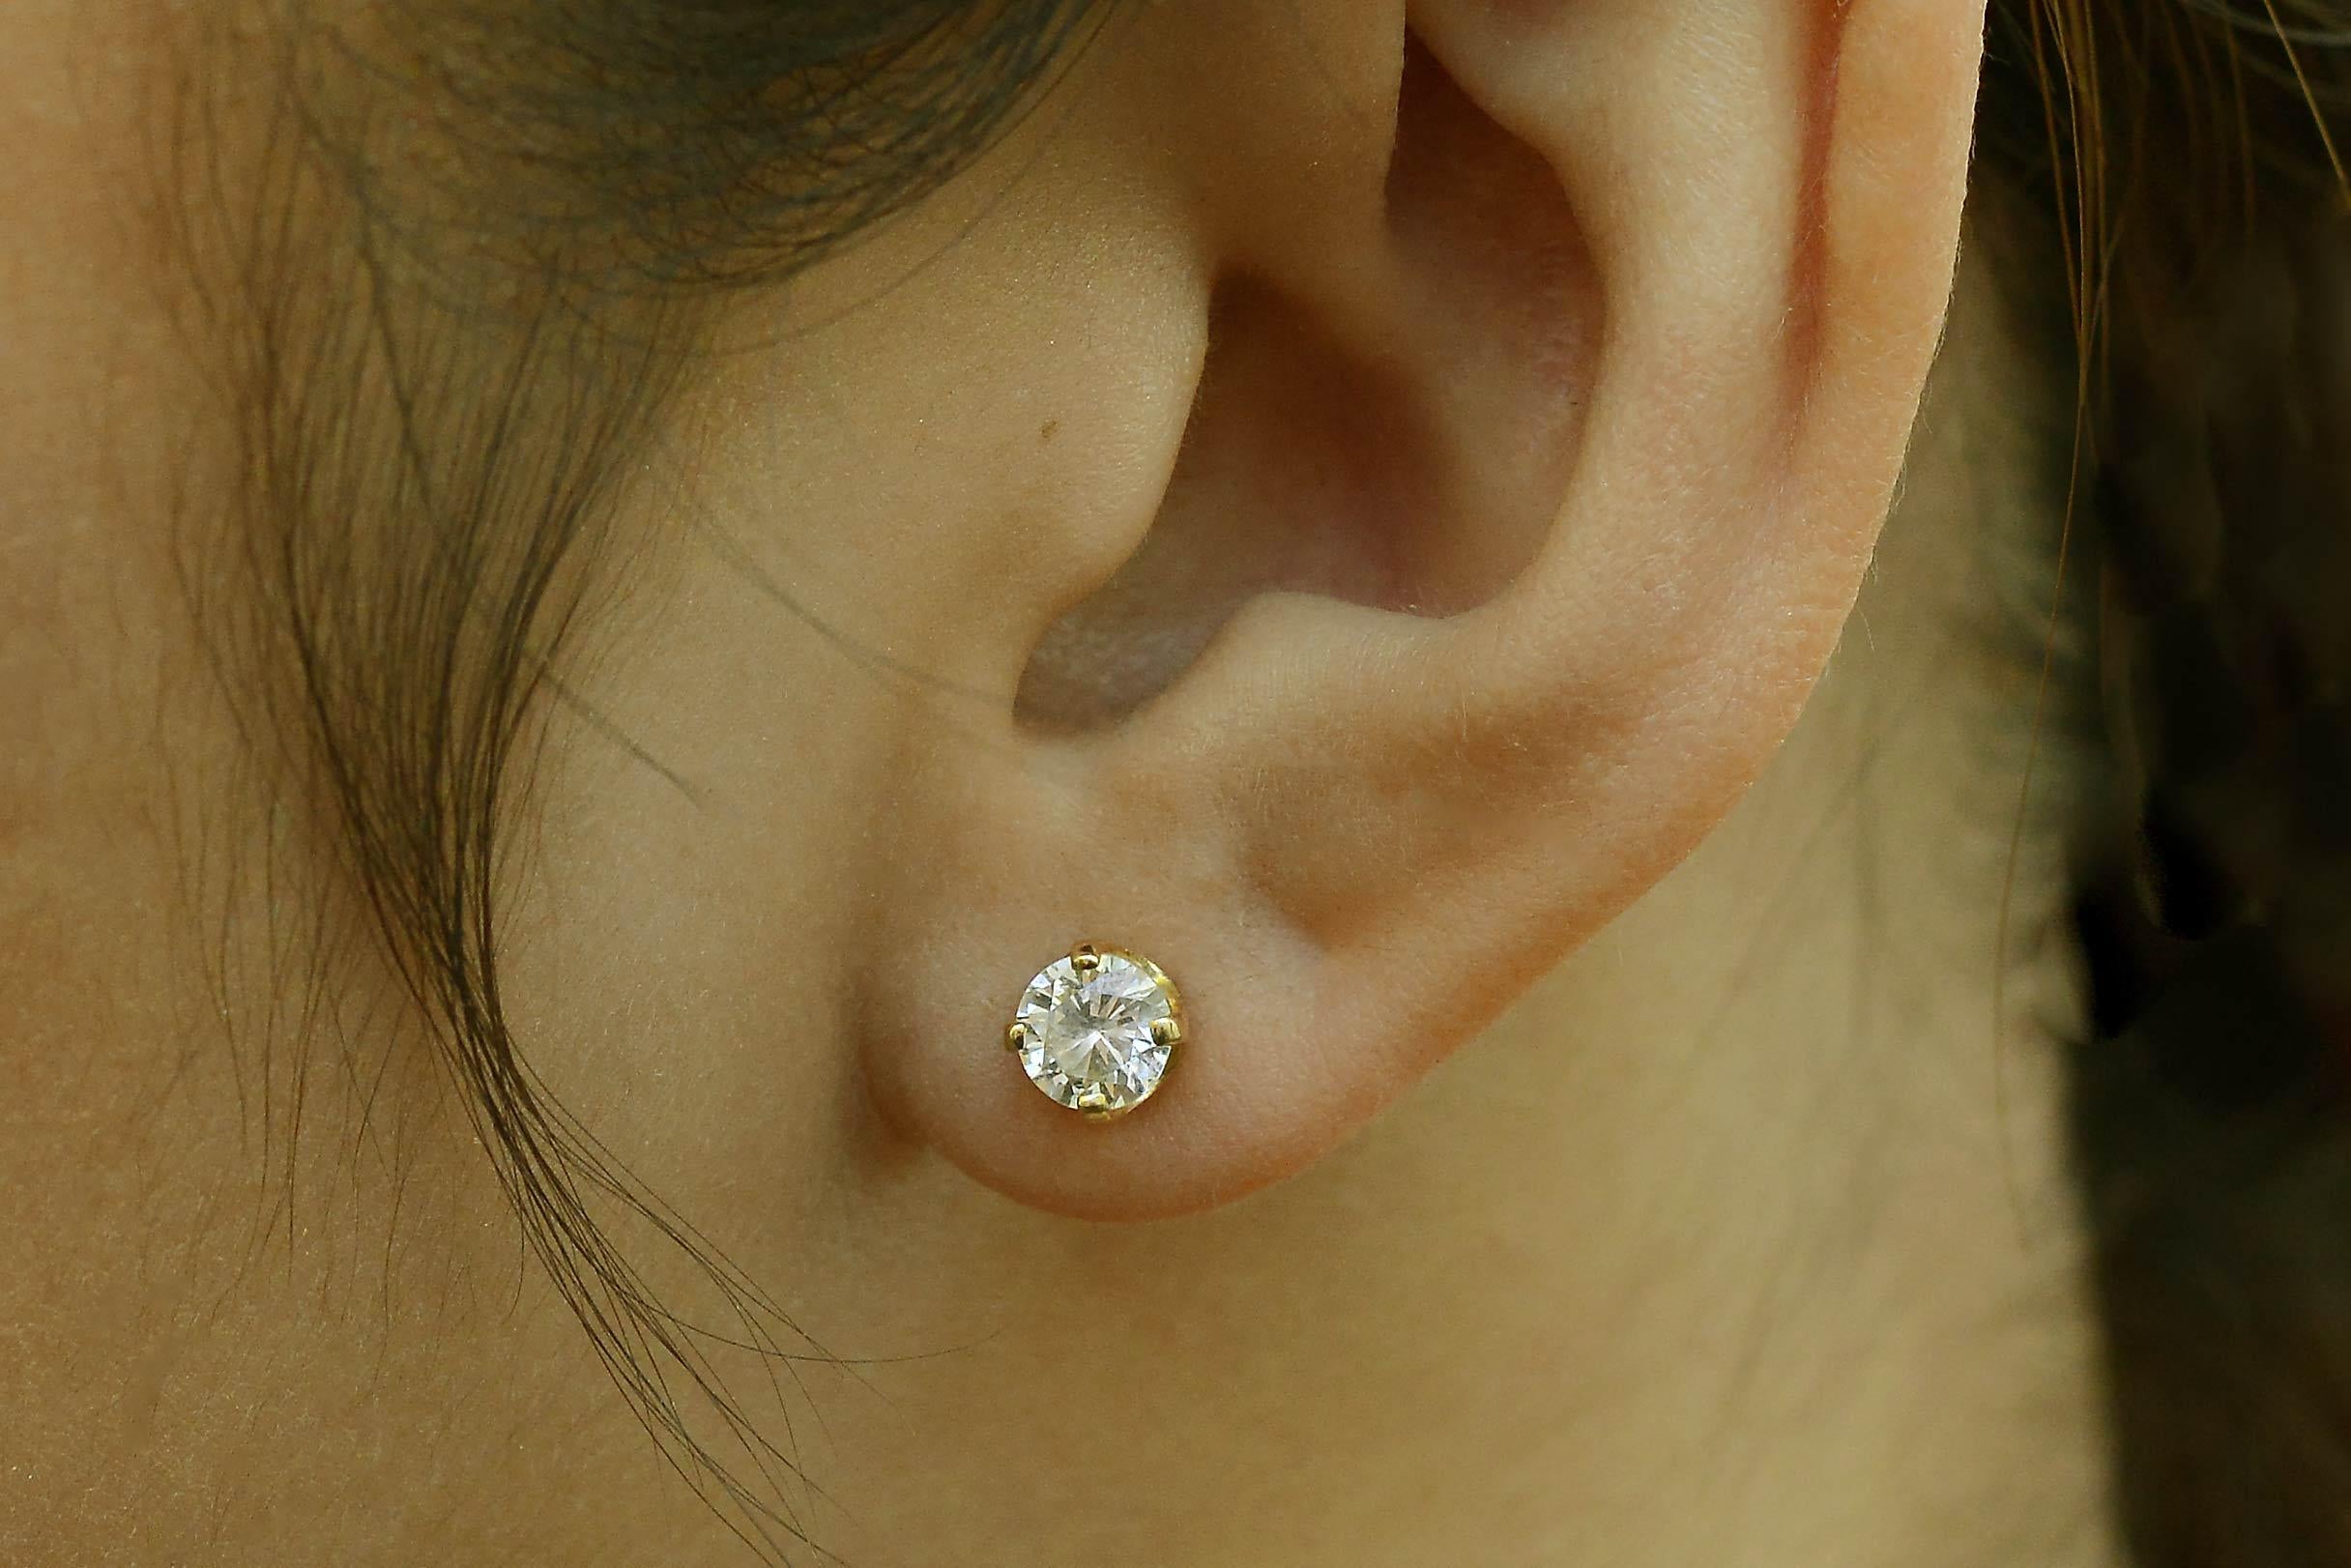 A pair of vintage diamond stud earrings. Totaling 1 carat, the round diamonds glisten a highly-desired near colorless (G color) graced with sparkling clarity and sit snugly in their 4 prong, 14k yellow gold settings, ensuring a dynamic, classic